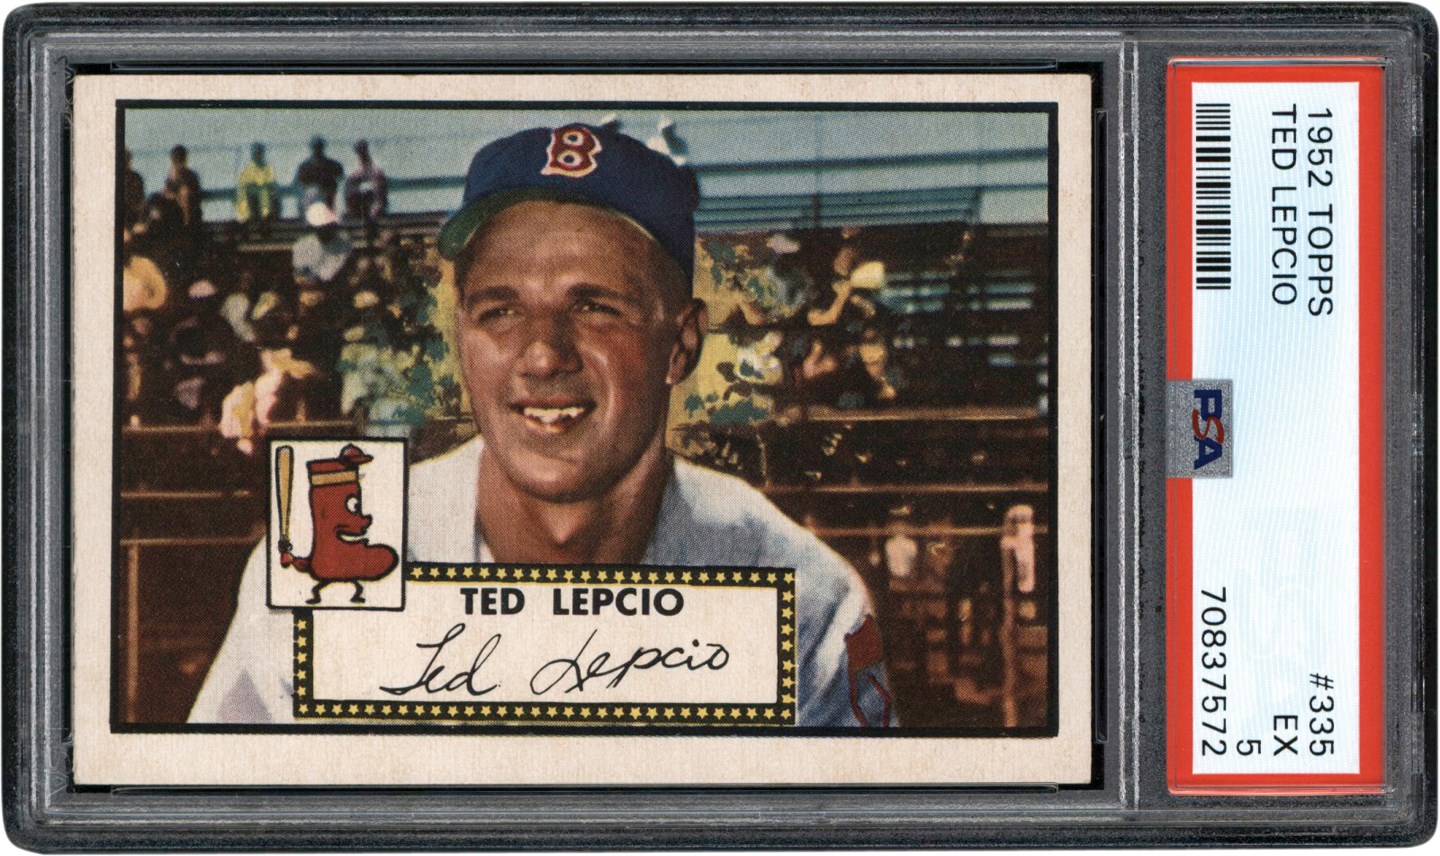 1952 Topps #335 Ted Lepcio PSA EX 5 - Newly Discovered Example